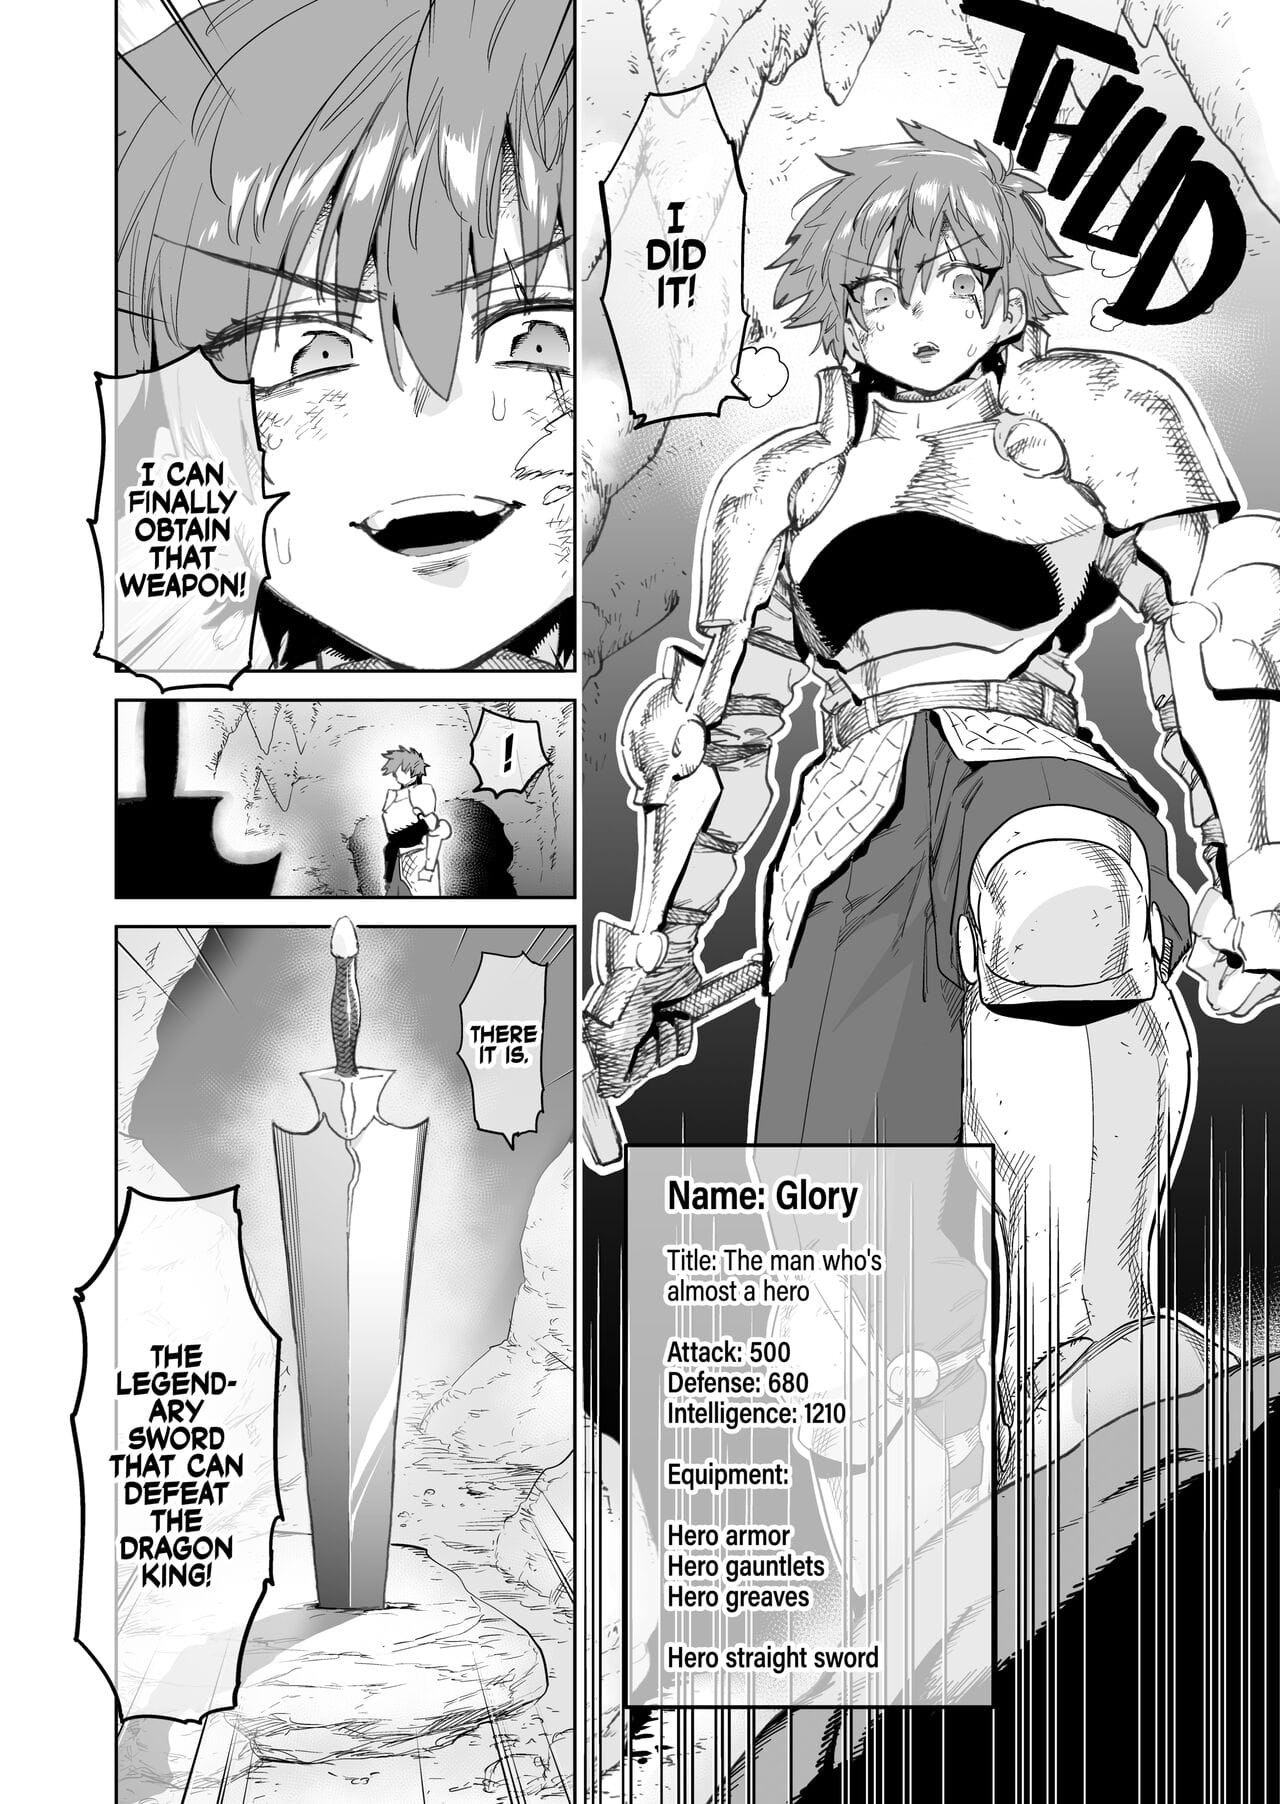 [Horieros no Ouchi (Horieros)] The Adventurer Who Pulled the Sword That Increases Your Attack at the Cost of Intelligence for Every Femgasm! [English] {2d-market com} [Decensored] [Digital]